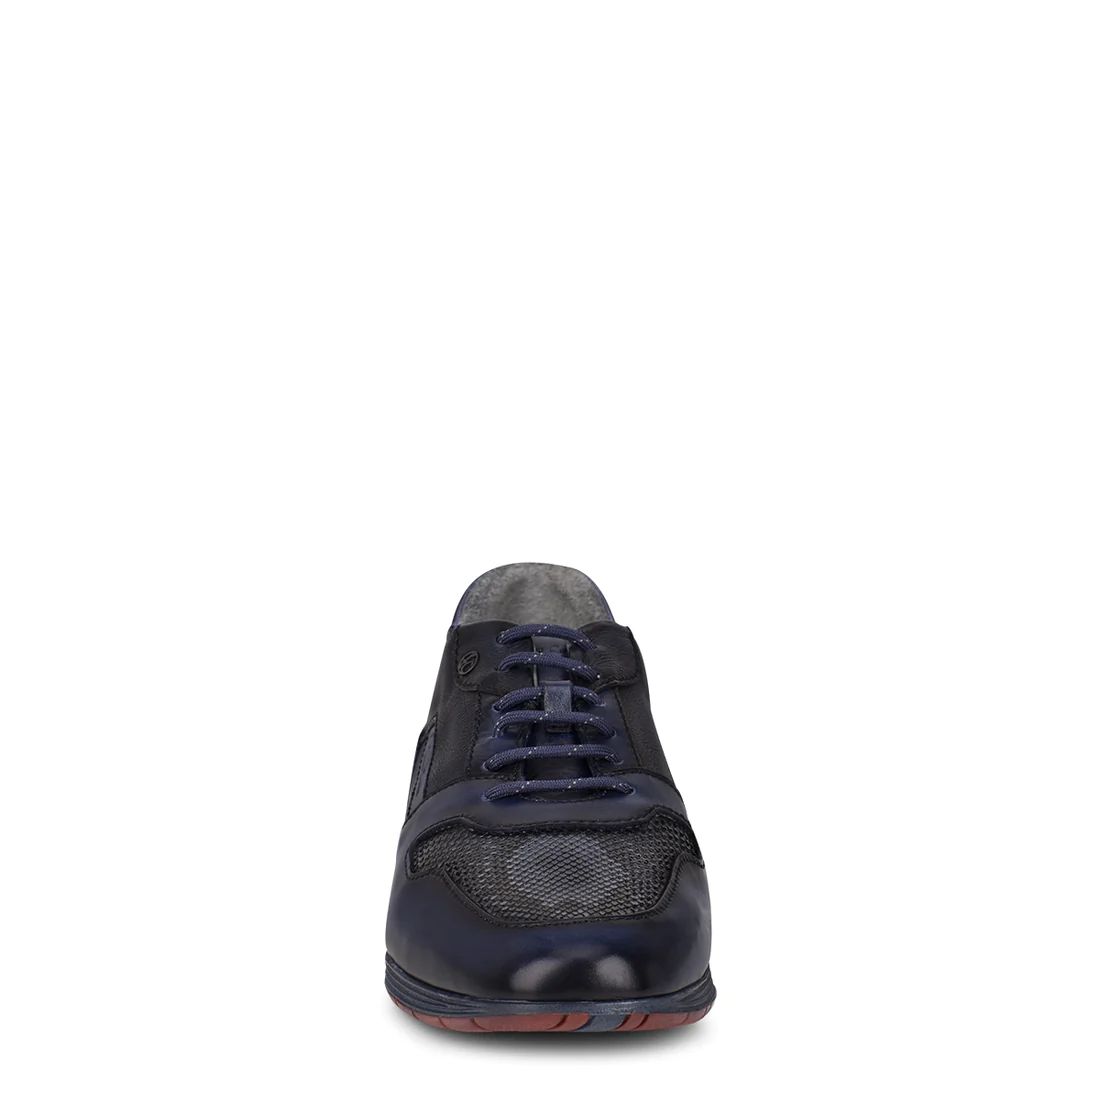 Cuadra | Hand-Painted Blue Montecarlo Leather Sneakers